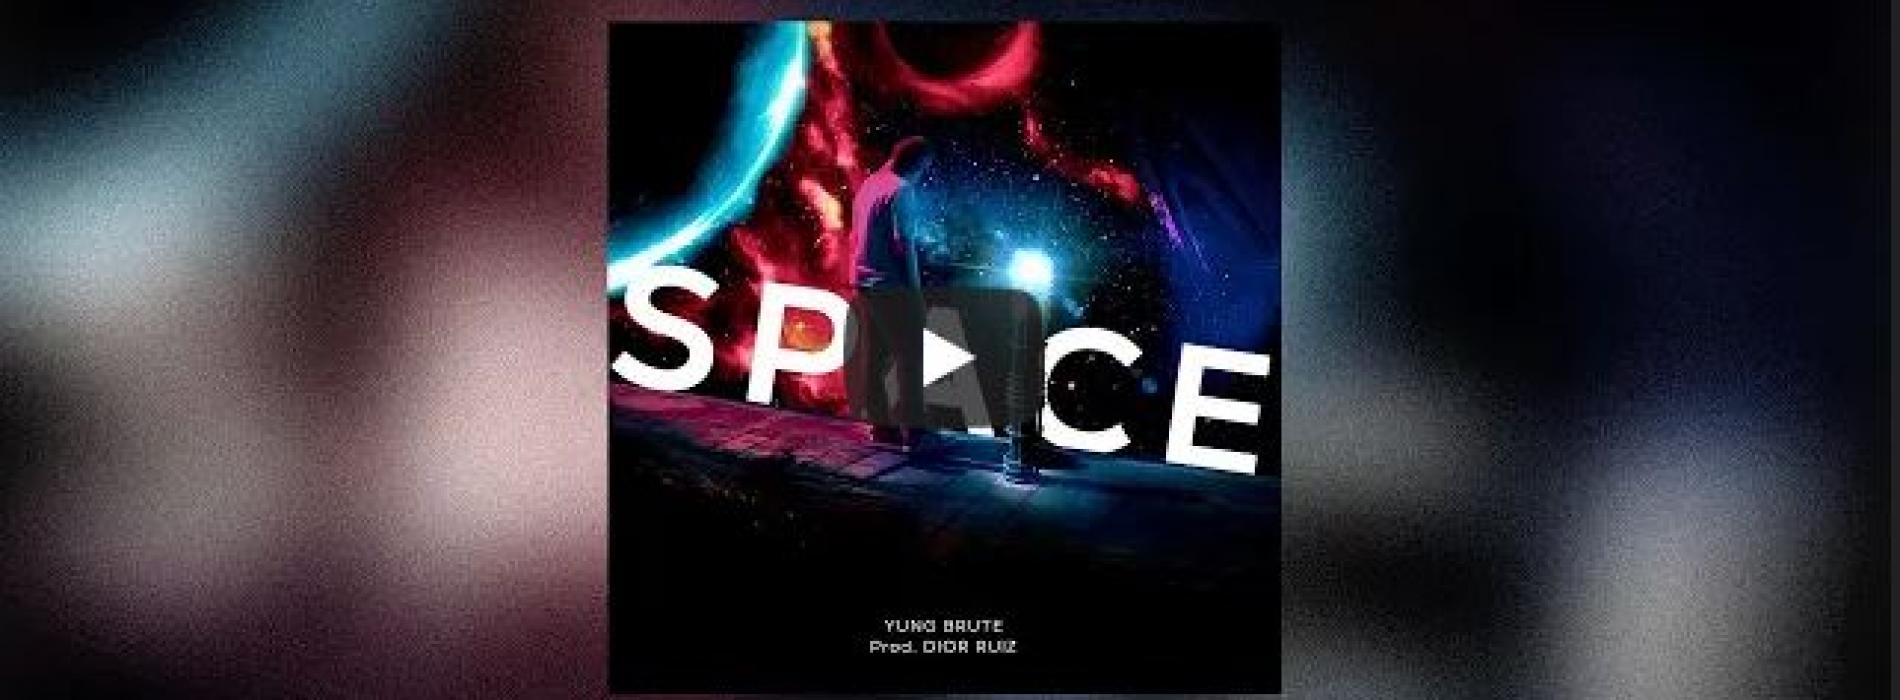 New Music : Yung Brute : Need Some Space (Official Animation Video)